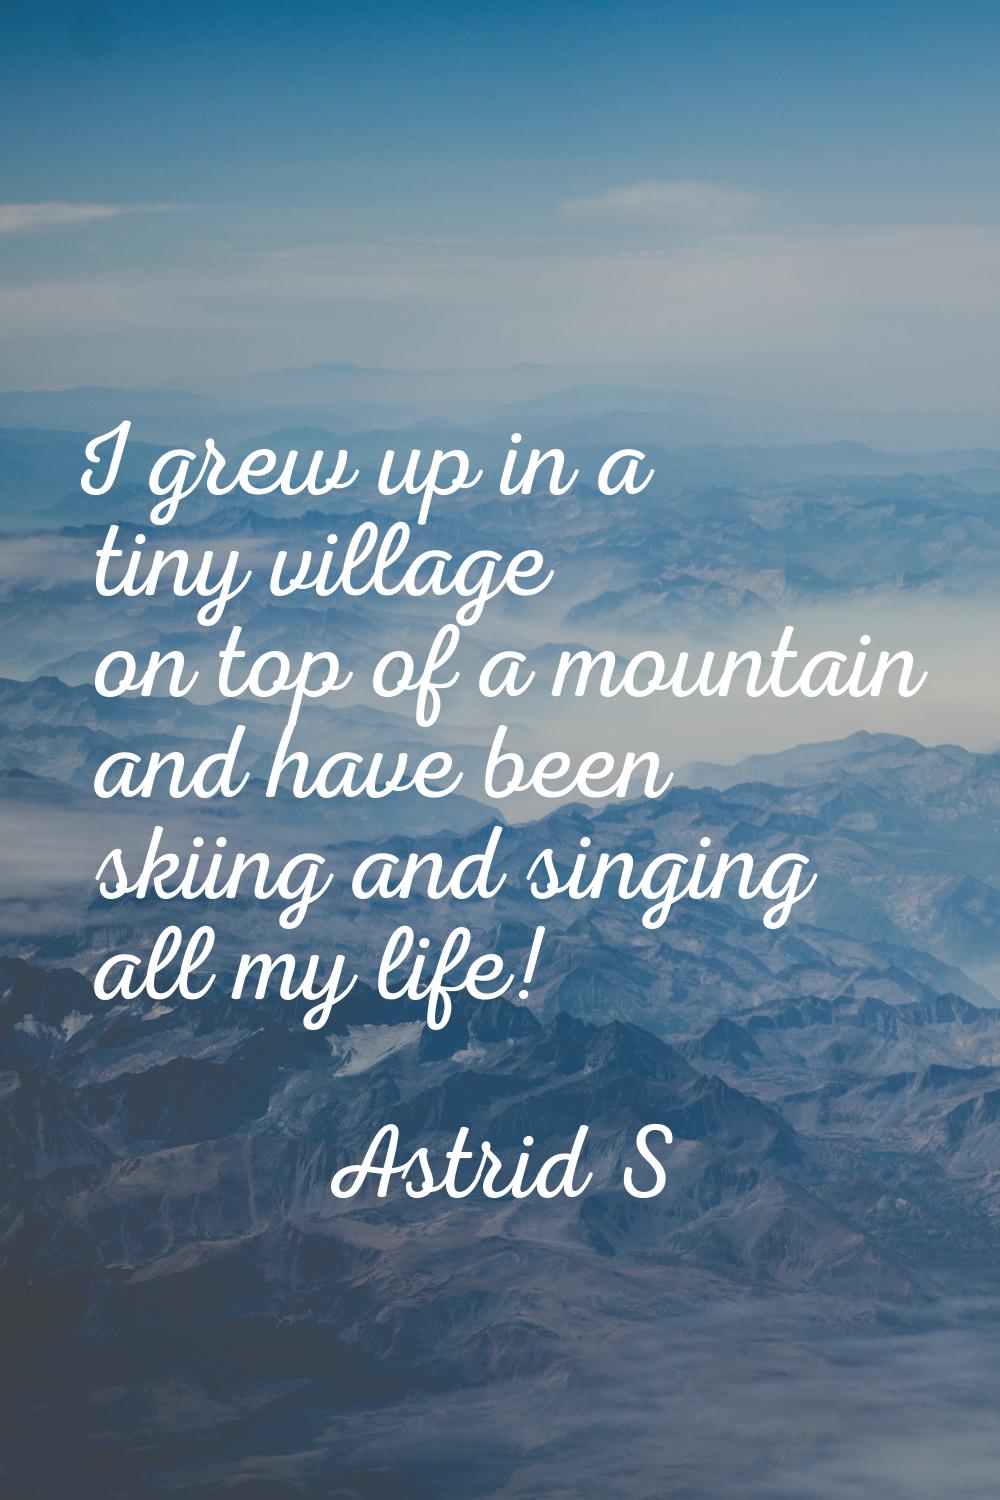 I grew up in a tiny village on top of a mountain and have been skiing and singing all my life!